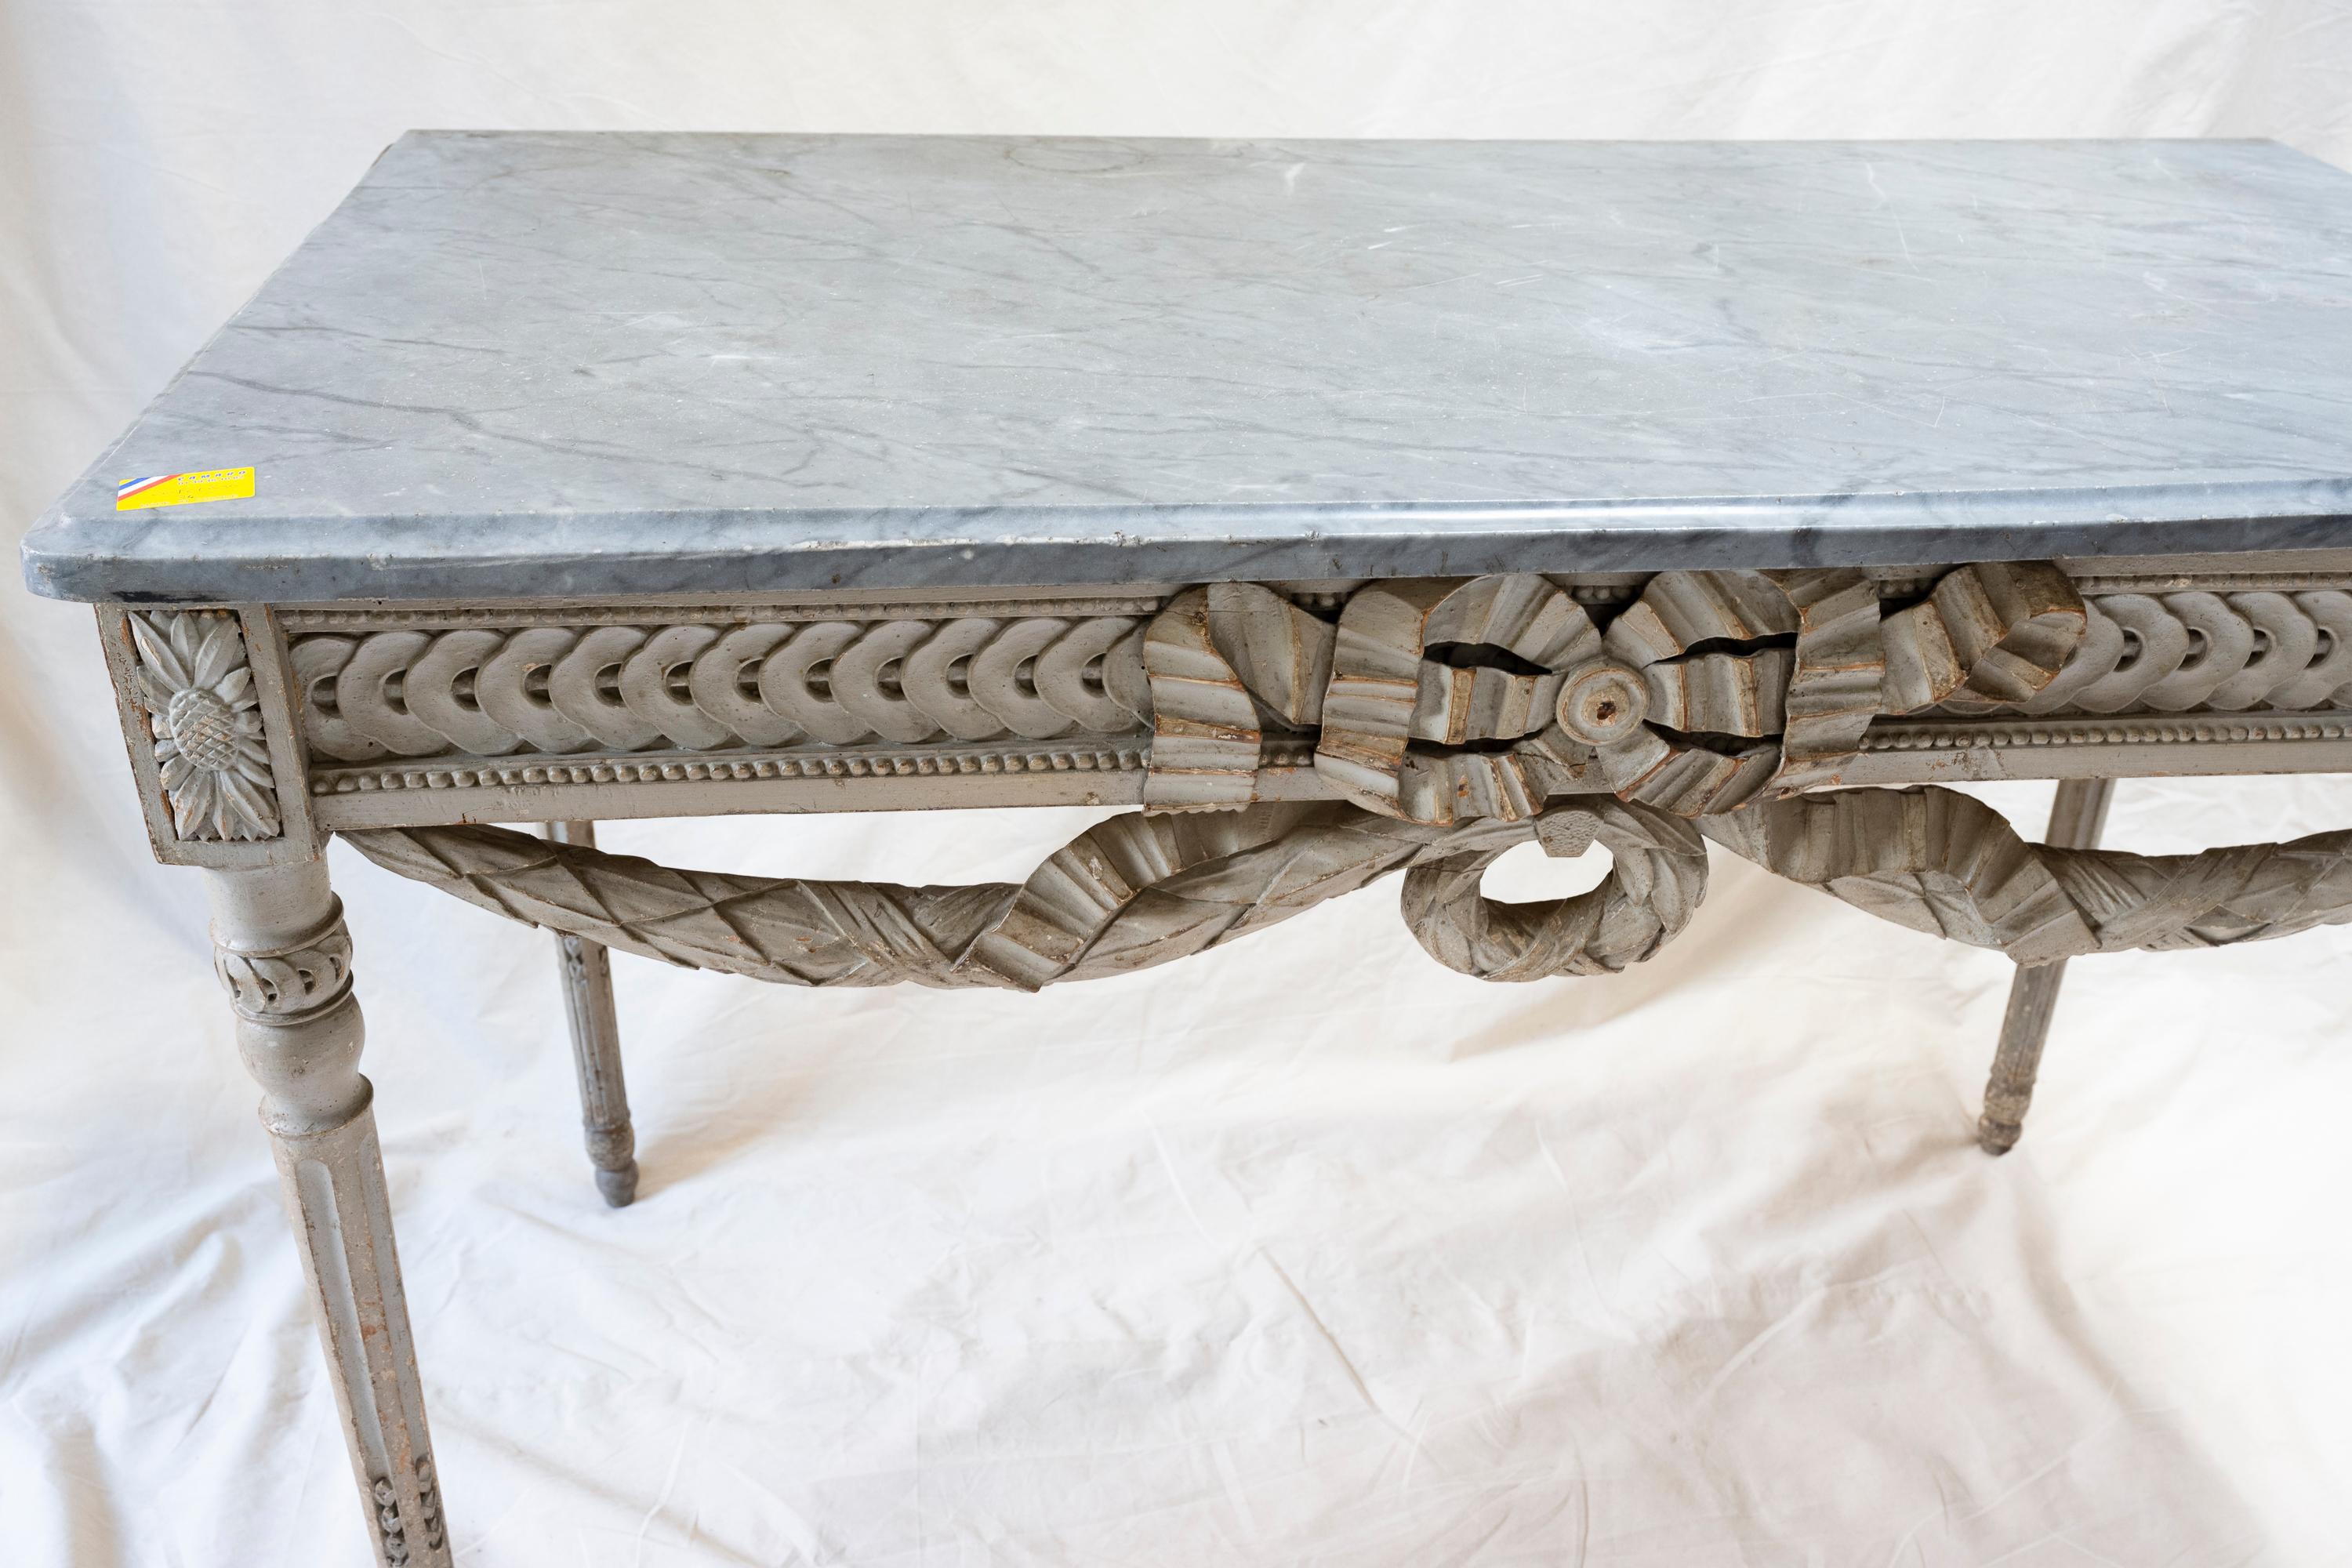 Louis XVI Console Table (c. 1850). Topped with Italian marble, this gray lacquered console table—with its ornate festoon embellishment—sat quietly in one of the salons in a family’s grand summer residence. 

Provenance: The summer castle of a